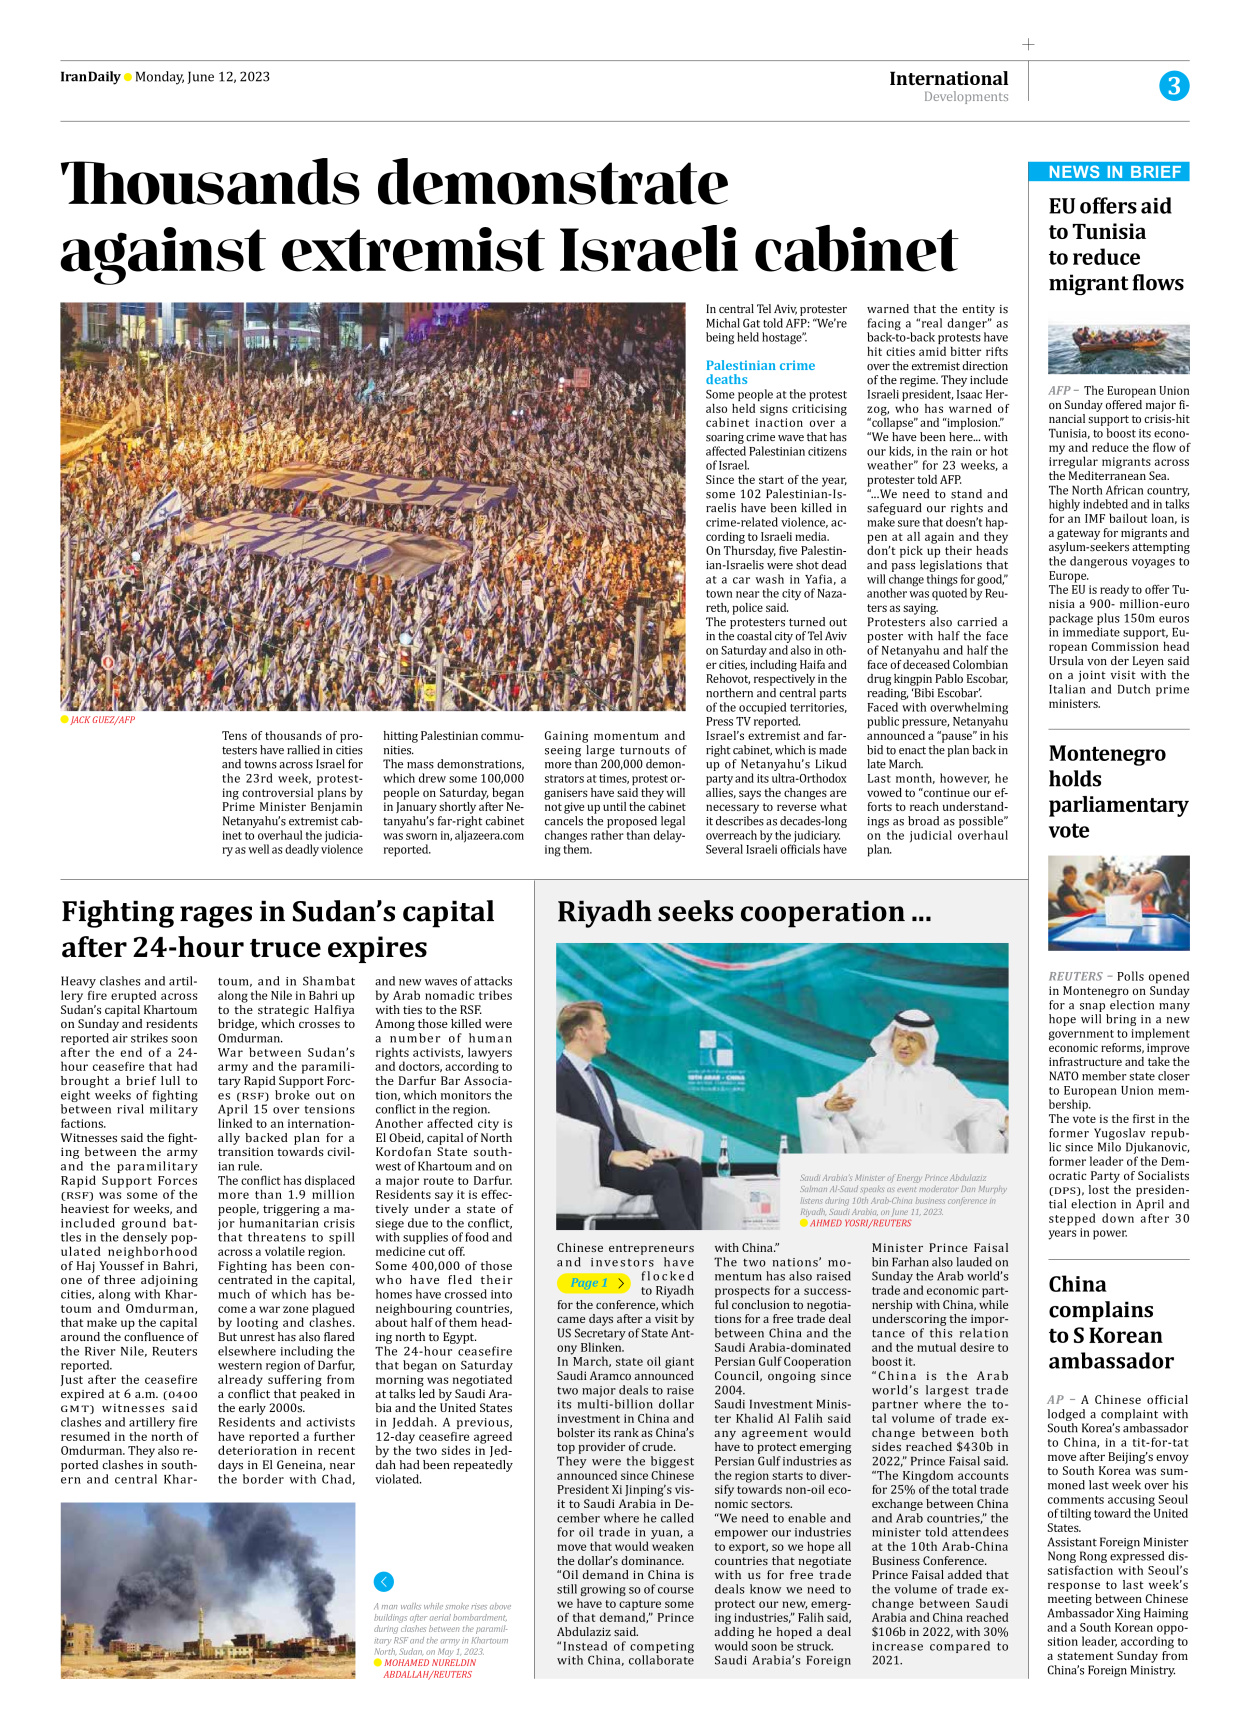 Iran Daily - Number Seven Thousand Three Hundred and Twelve - 12 June 2023 - Page 3